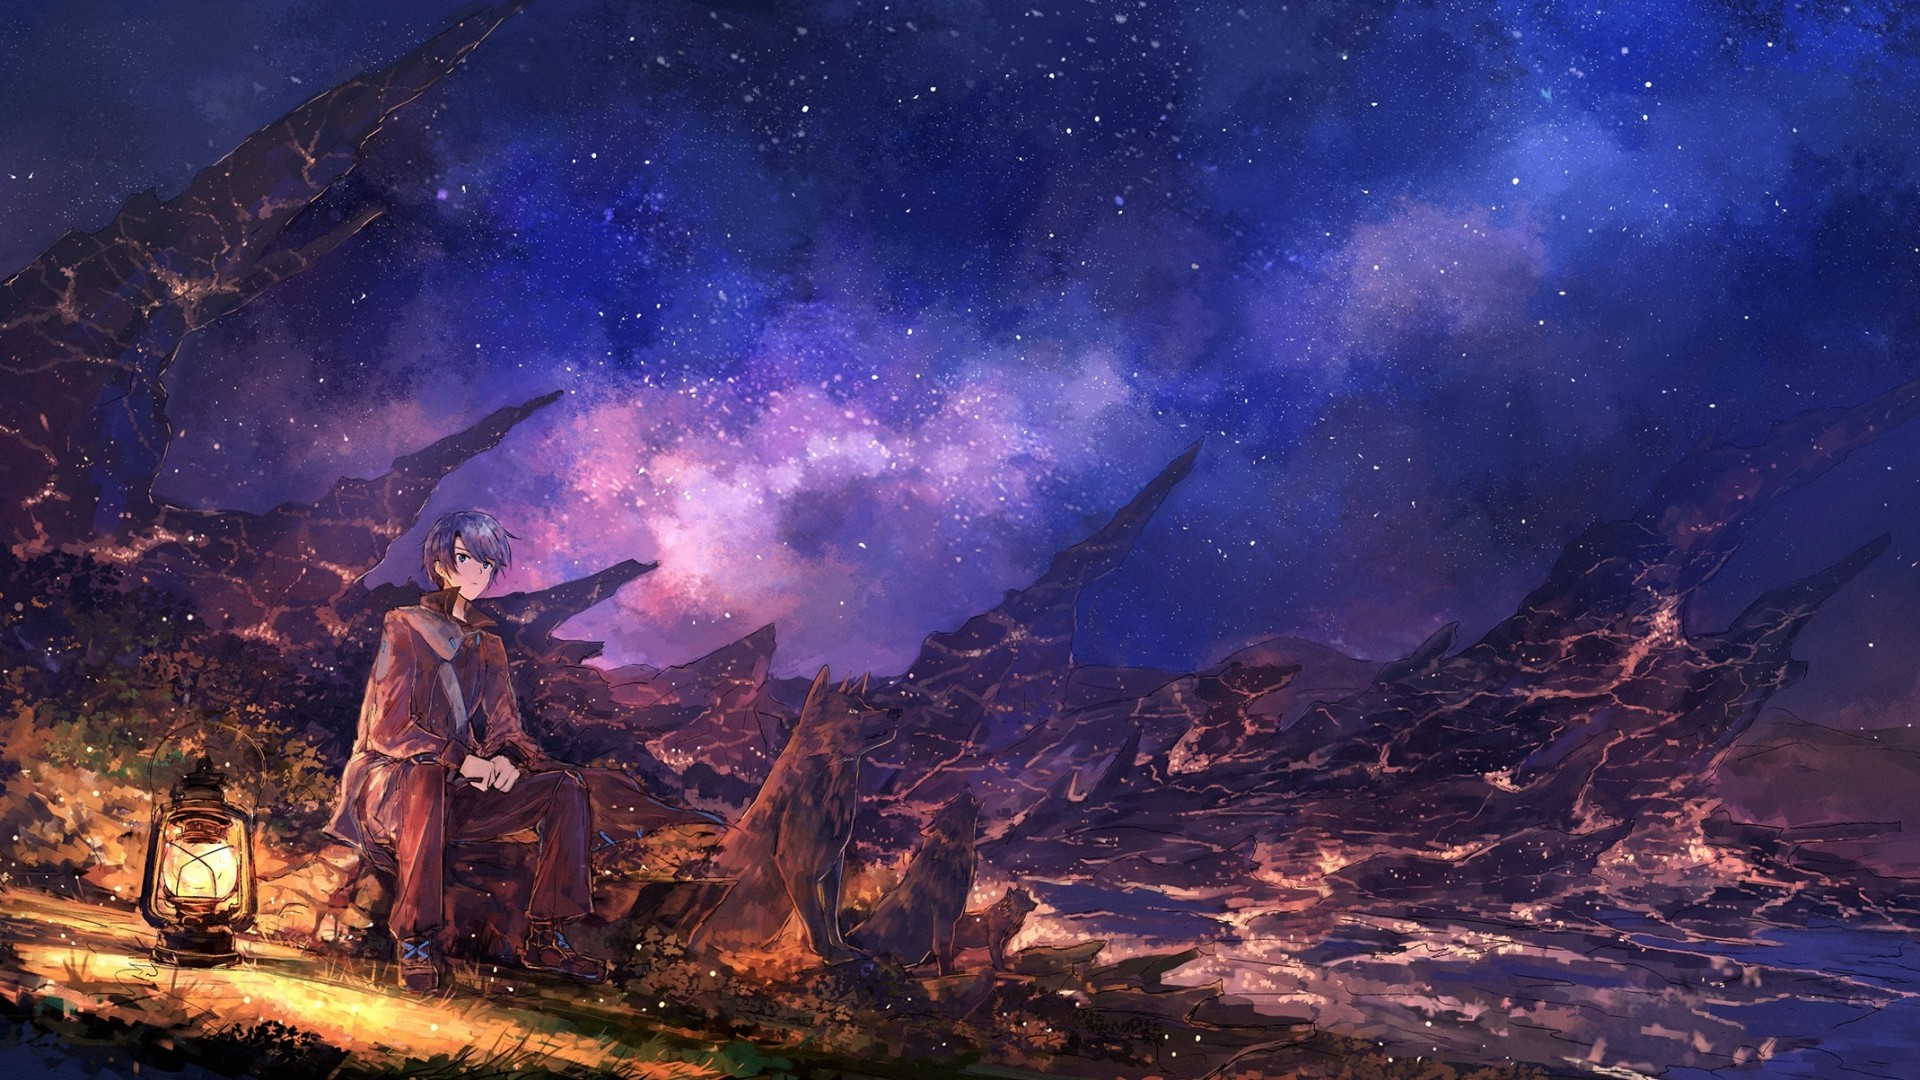 Download 1920x1080 Anime Starry Sky, Night, Anime Boy, Dogs, Lantern Wallpaper for Widescreen